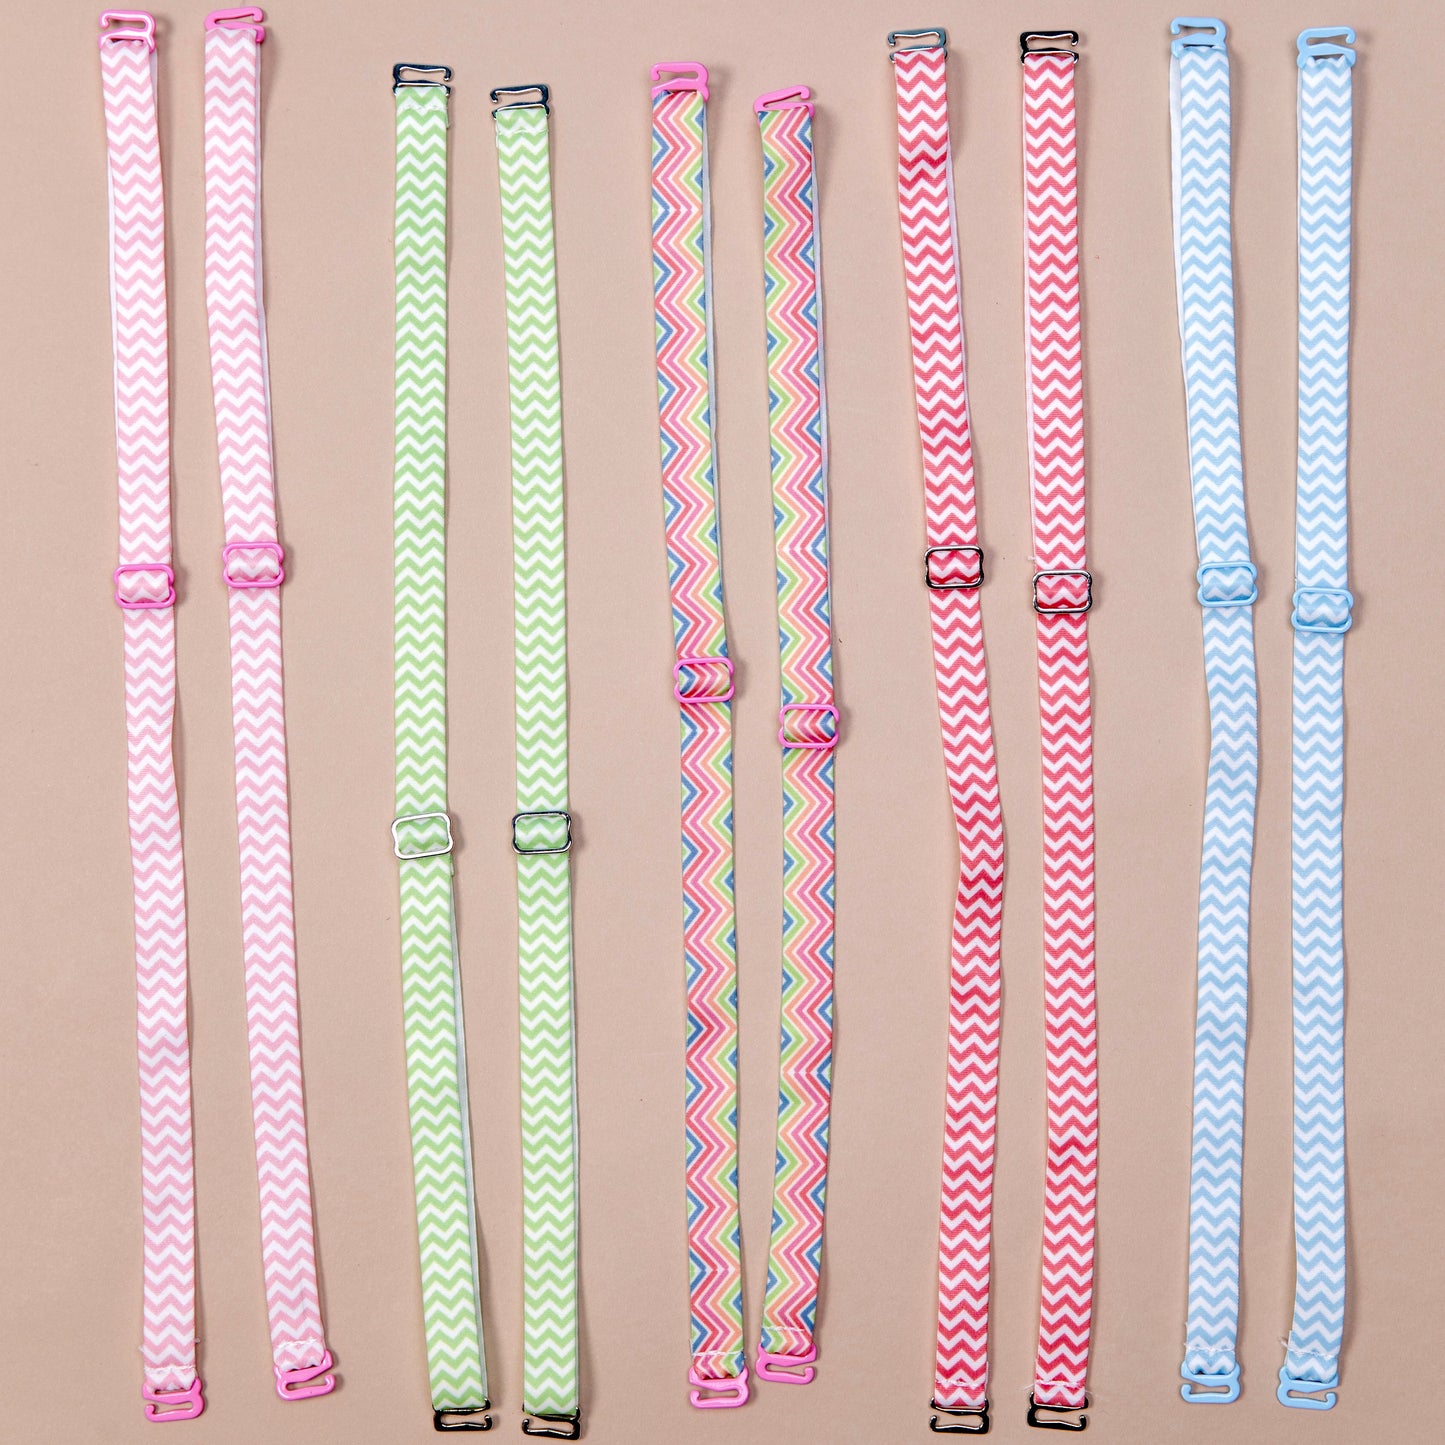 5 sets of interchangeable her-rah bra straps in chevron patterns of various colors, from left to right: flamingo Pink and white, apple green and white, rainbow, apricot and white, baby blue and white.